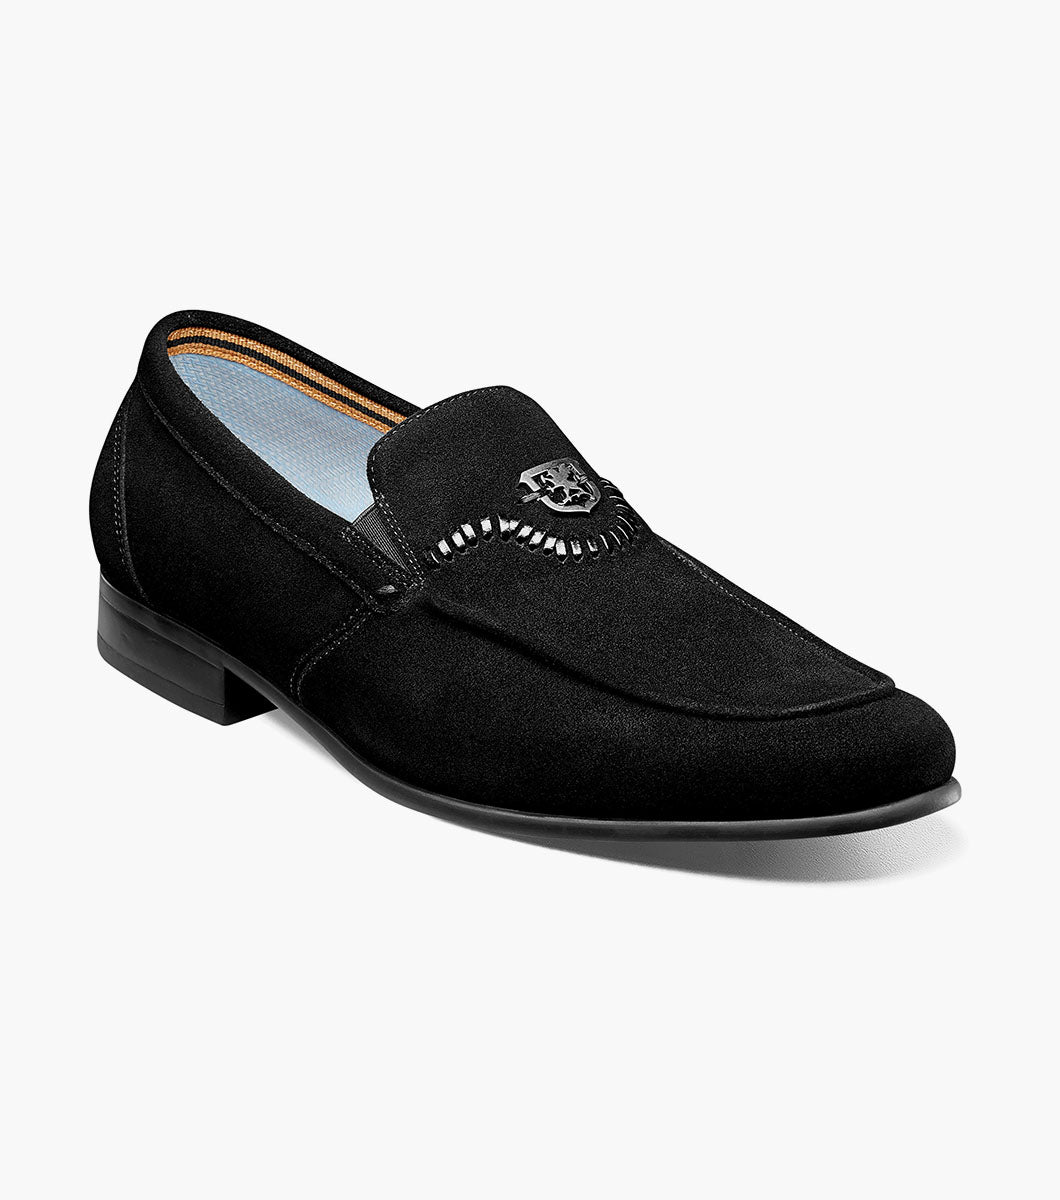 Quincy Moc Toe Slip On Shoes